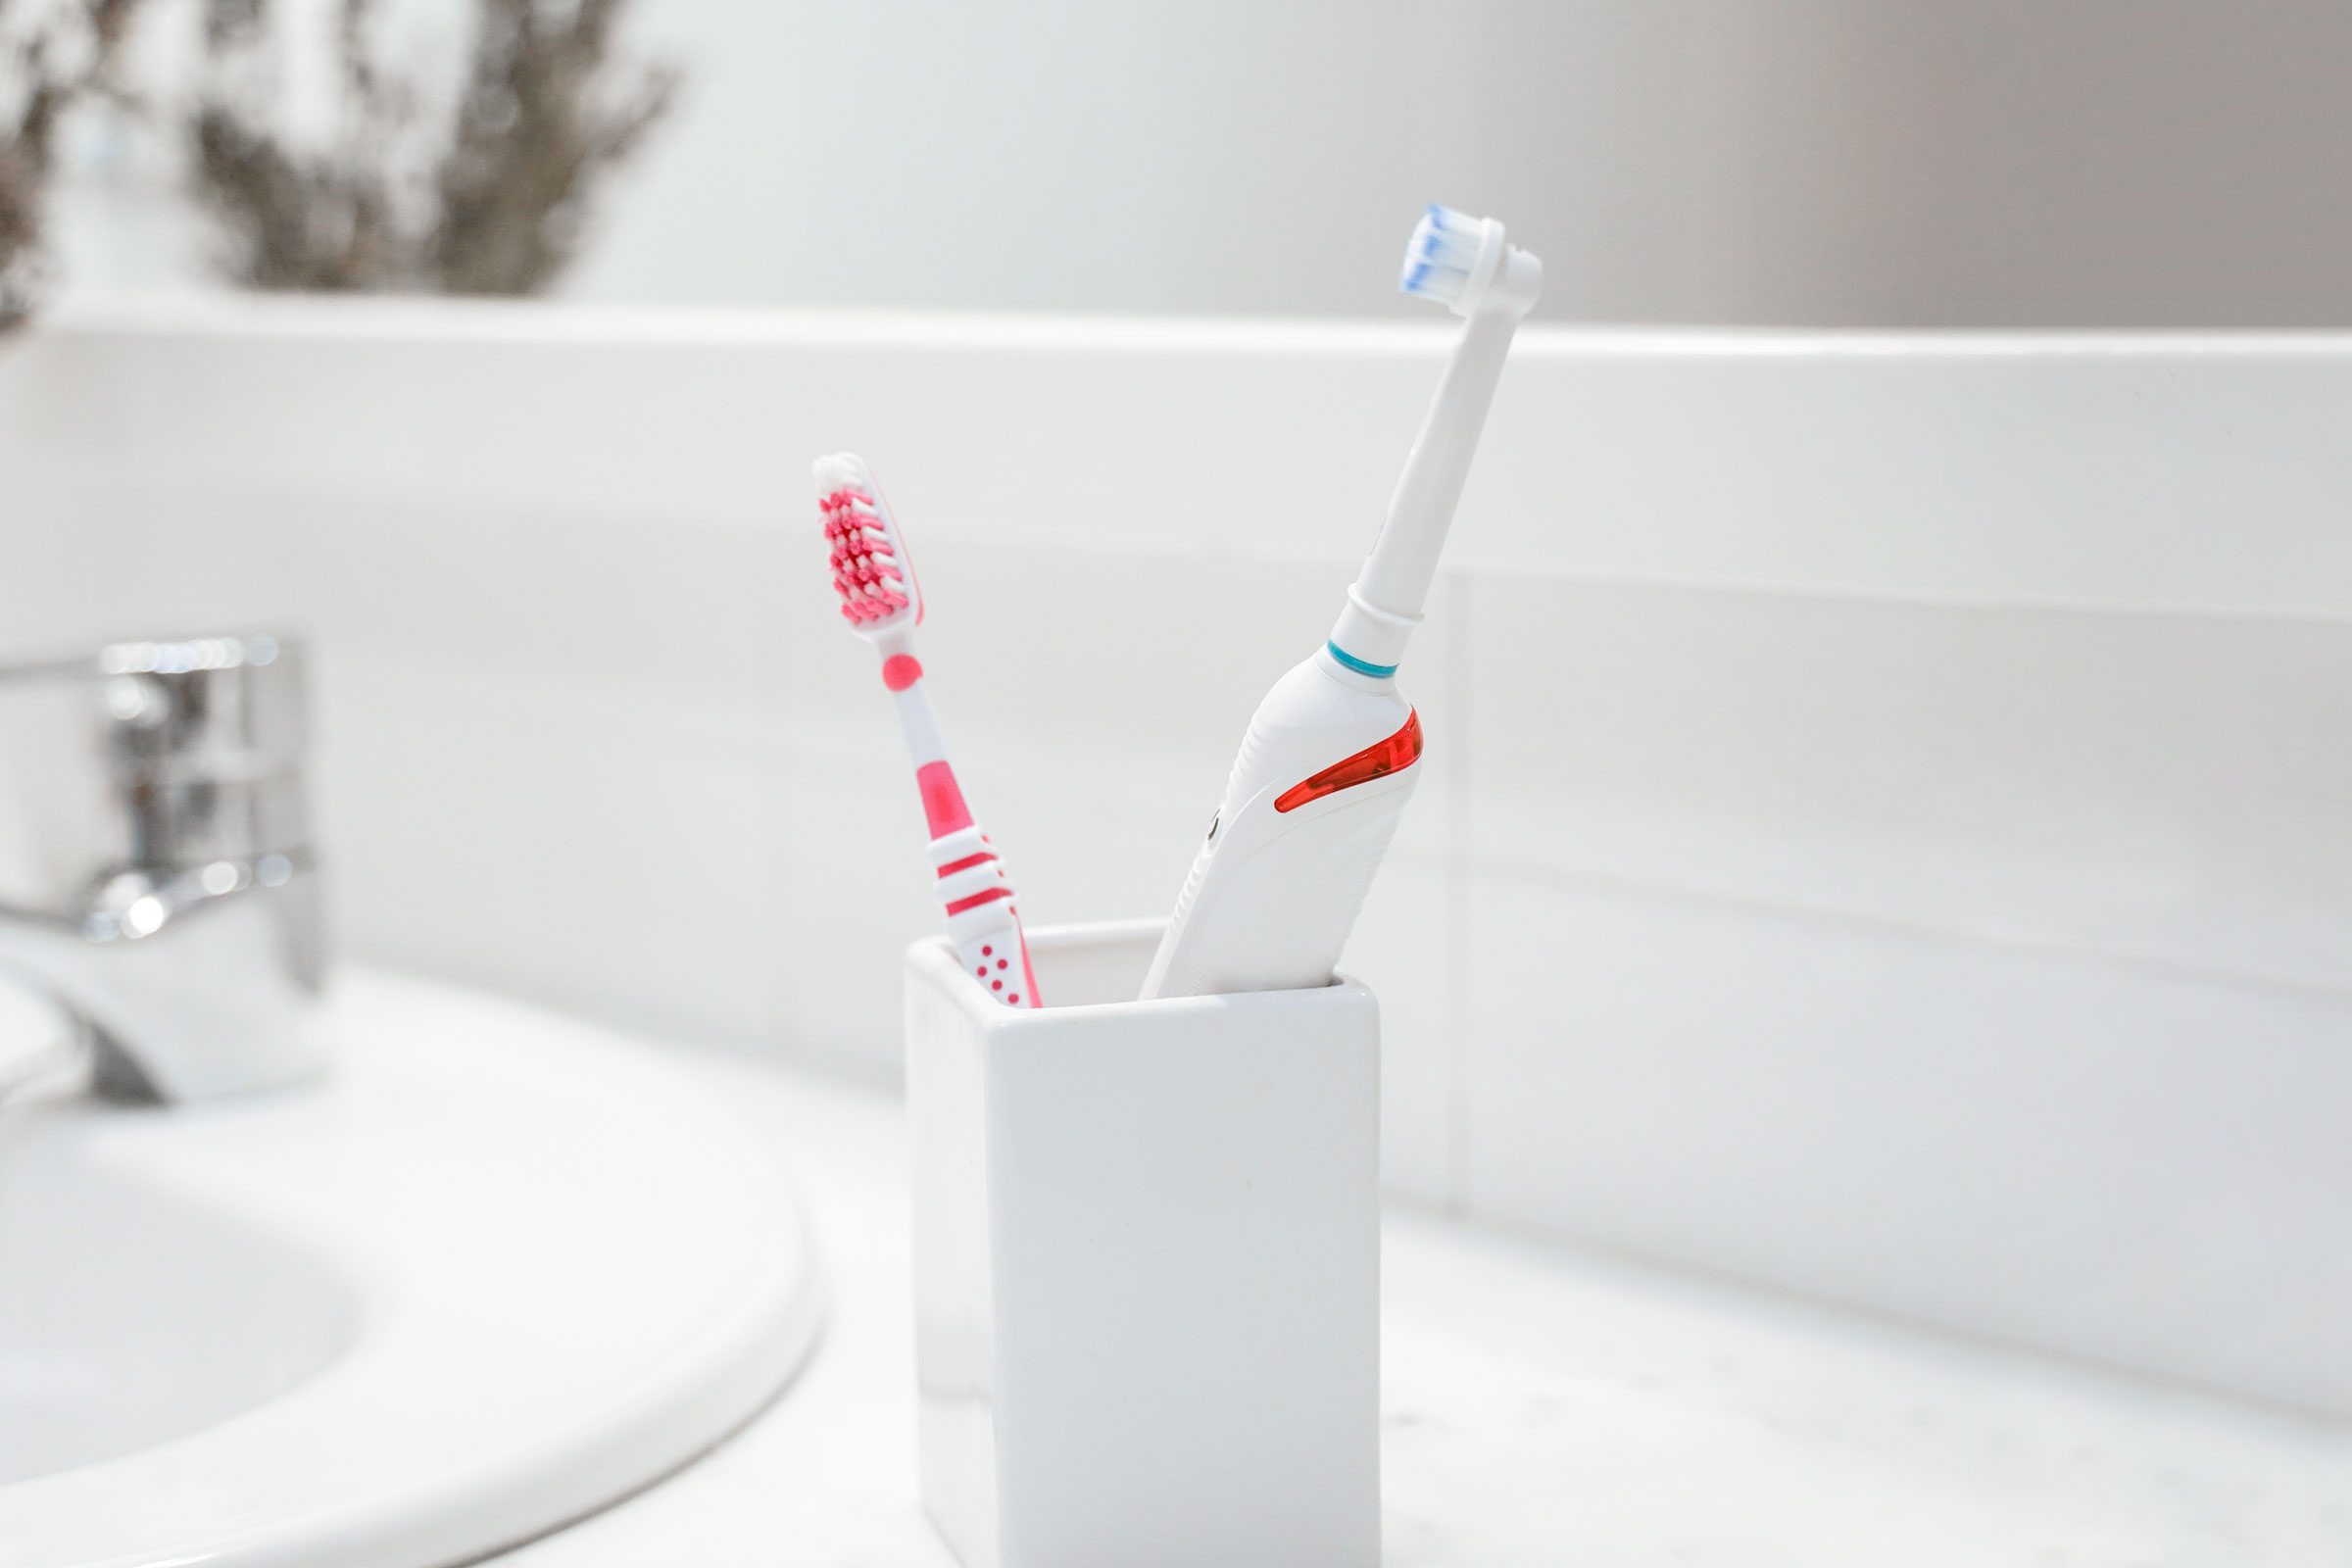 https://www.rd.com/wp-content/uploads/2023/01/two-toothbrushes-in-white-bathroom-GettyImages-1282648003-MLedit.jpg